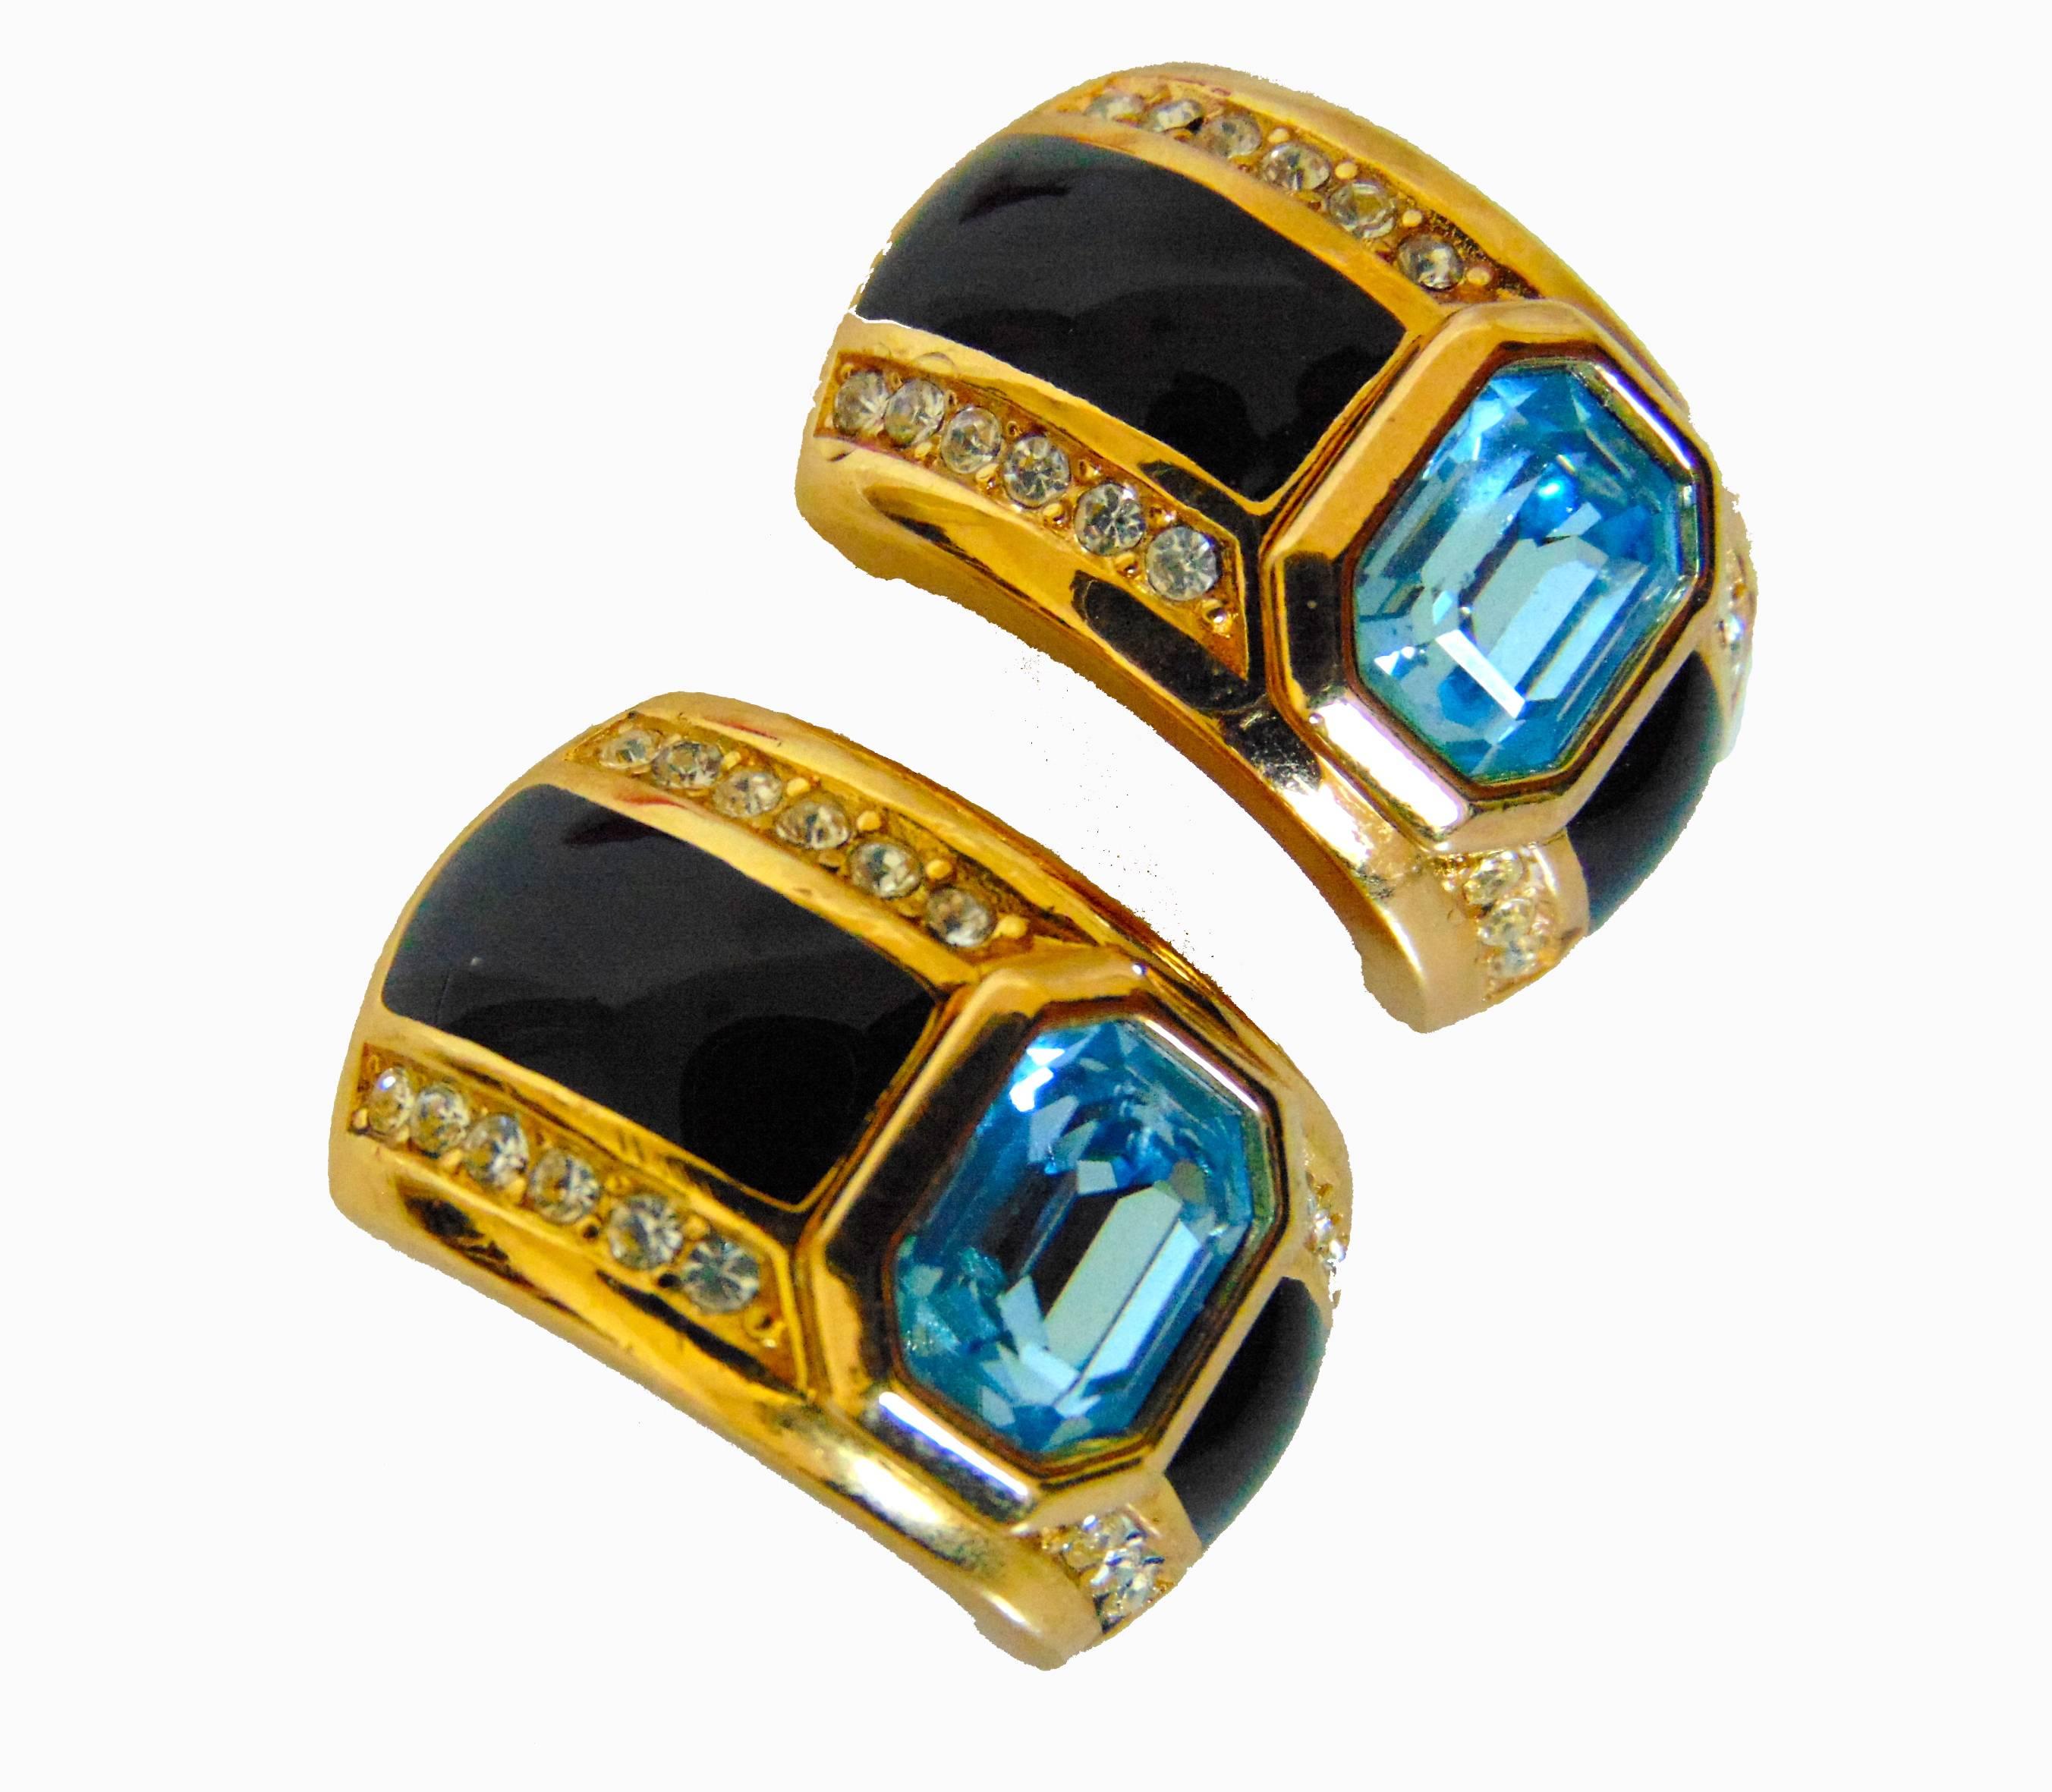 Christian Dior Art Deco Earrings with Faux Sapphire Topaz Crystals 1980s For Sale 1